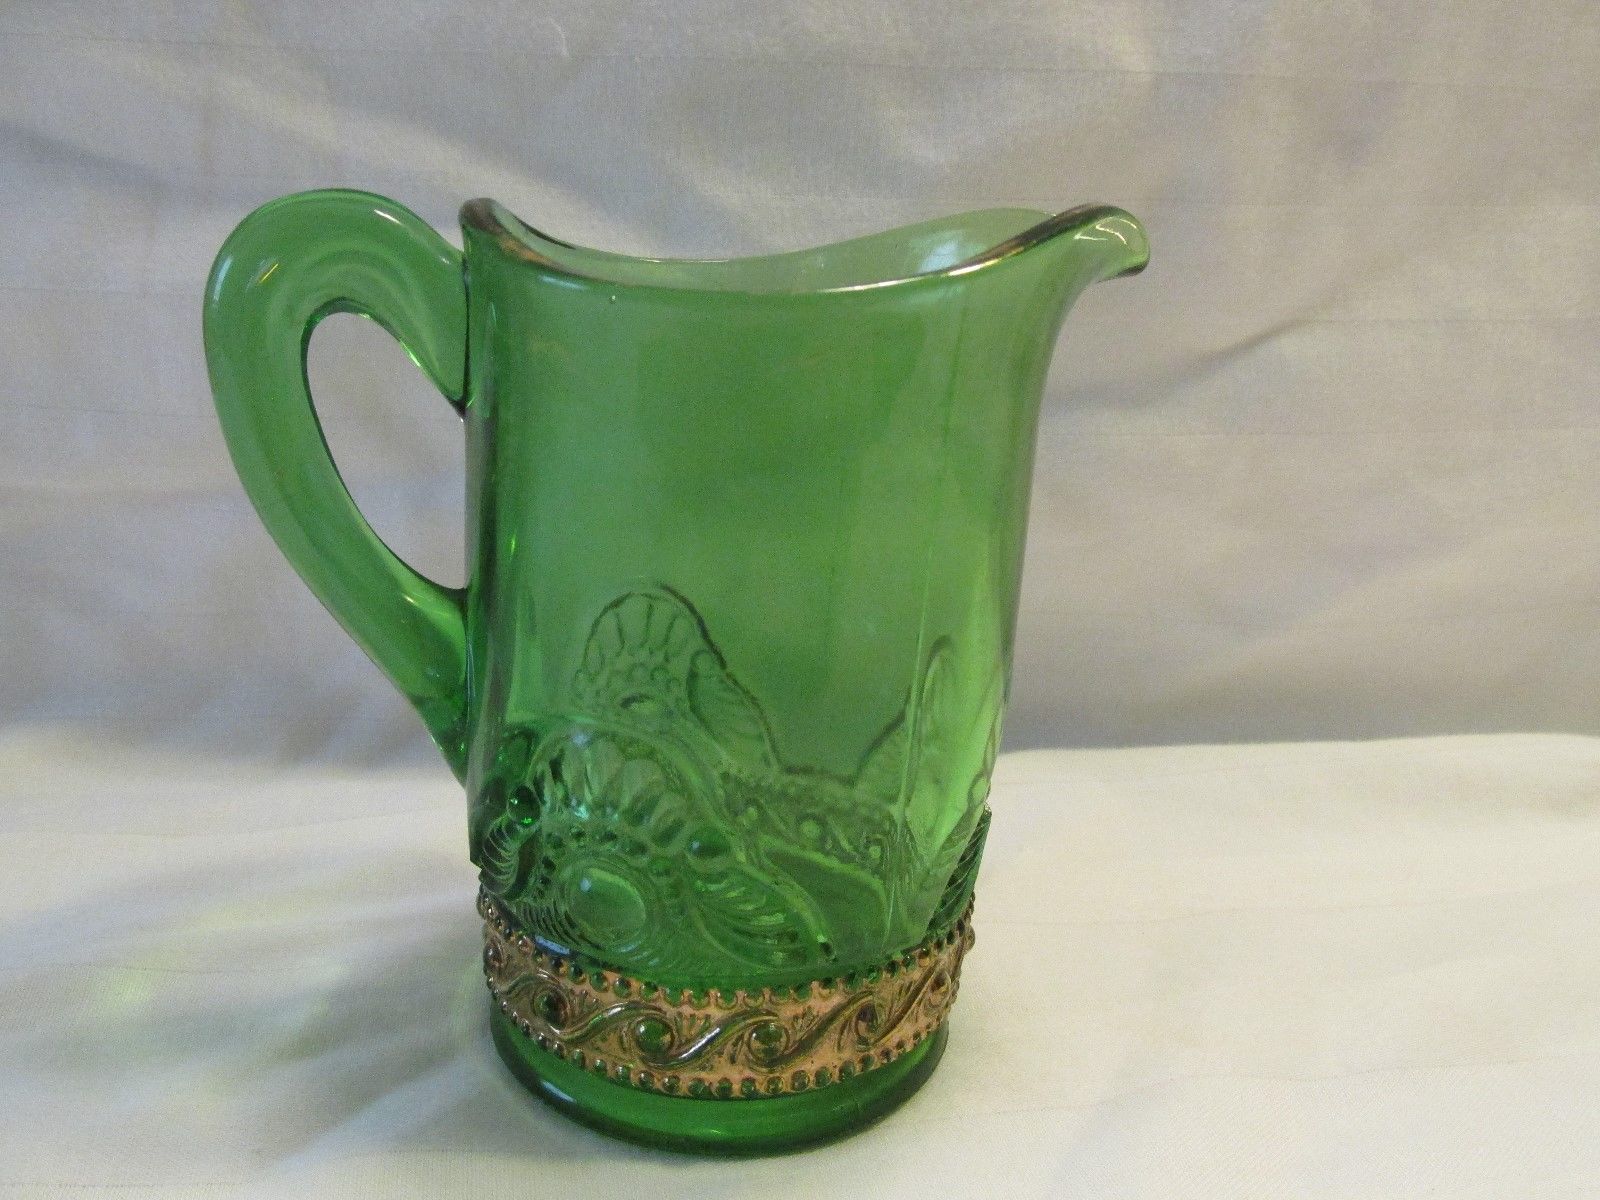 Vintage Green Depression Glass Creamer Pitcher With Gold Bottom Trim Antique Price Guide